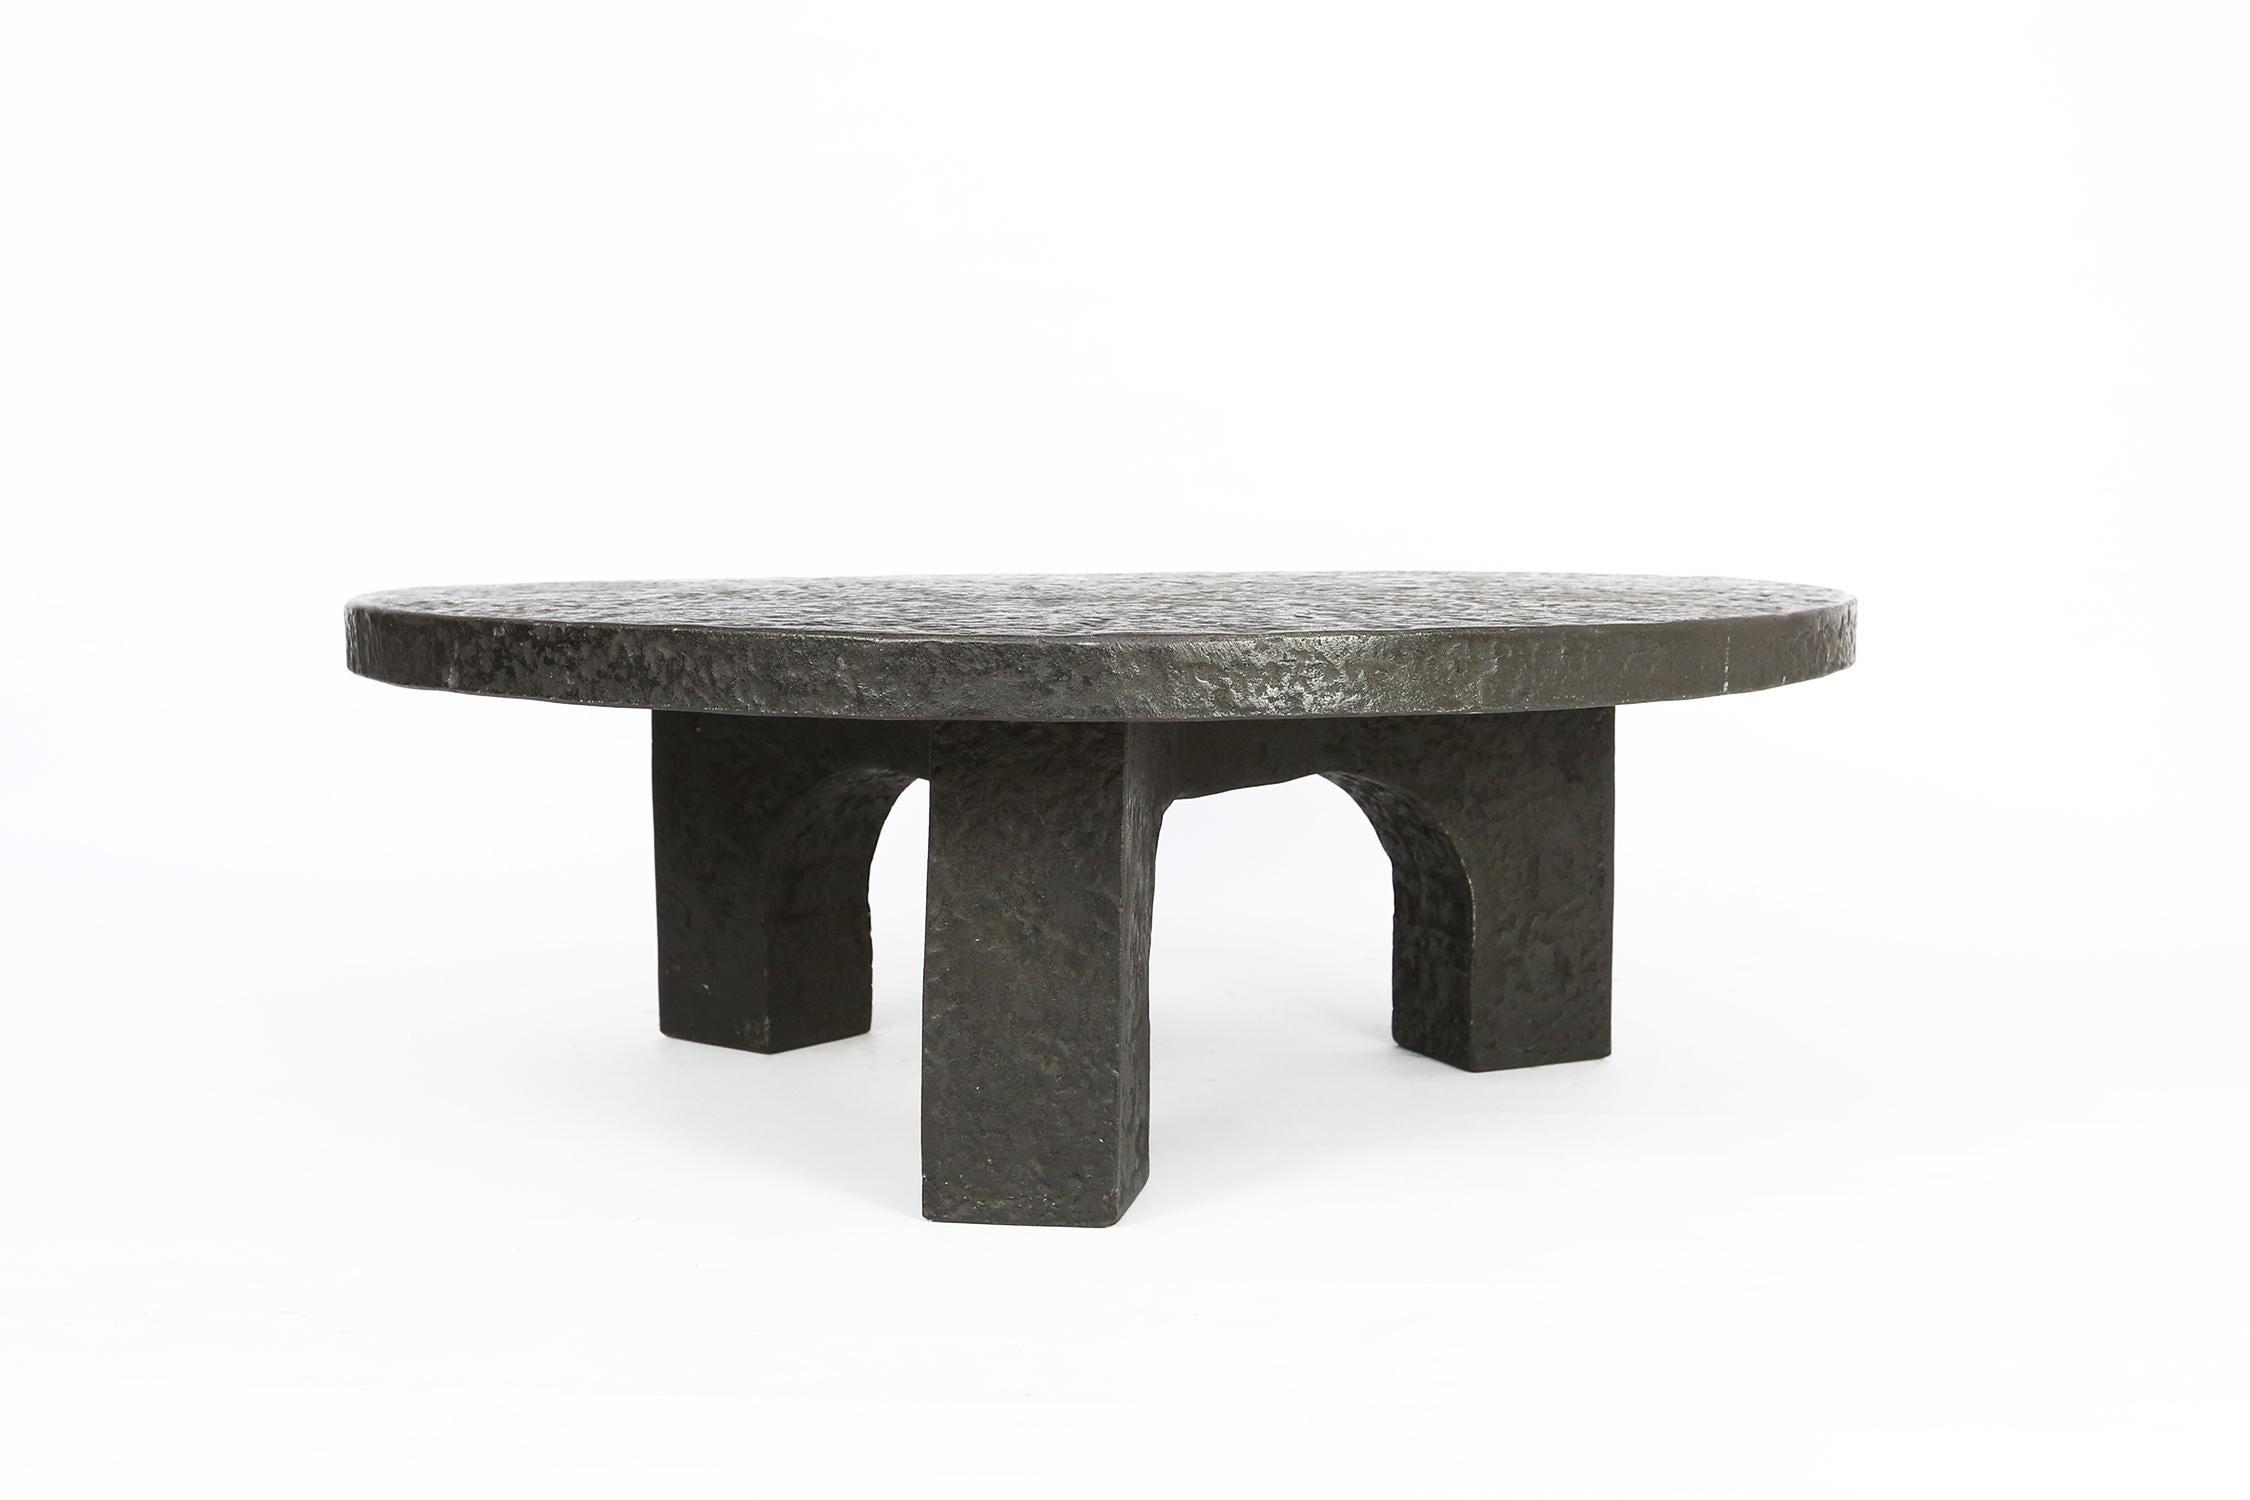 Late 20th Century Brutalist Coffee Table in Stone Look, Belgium, 1970s